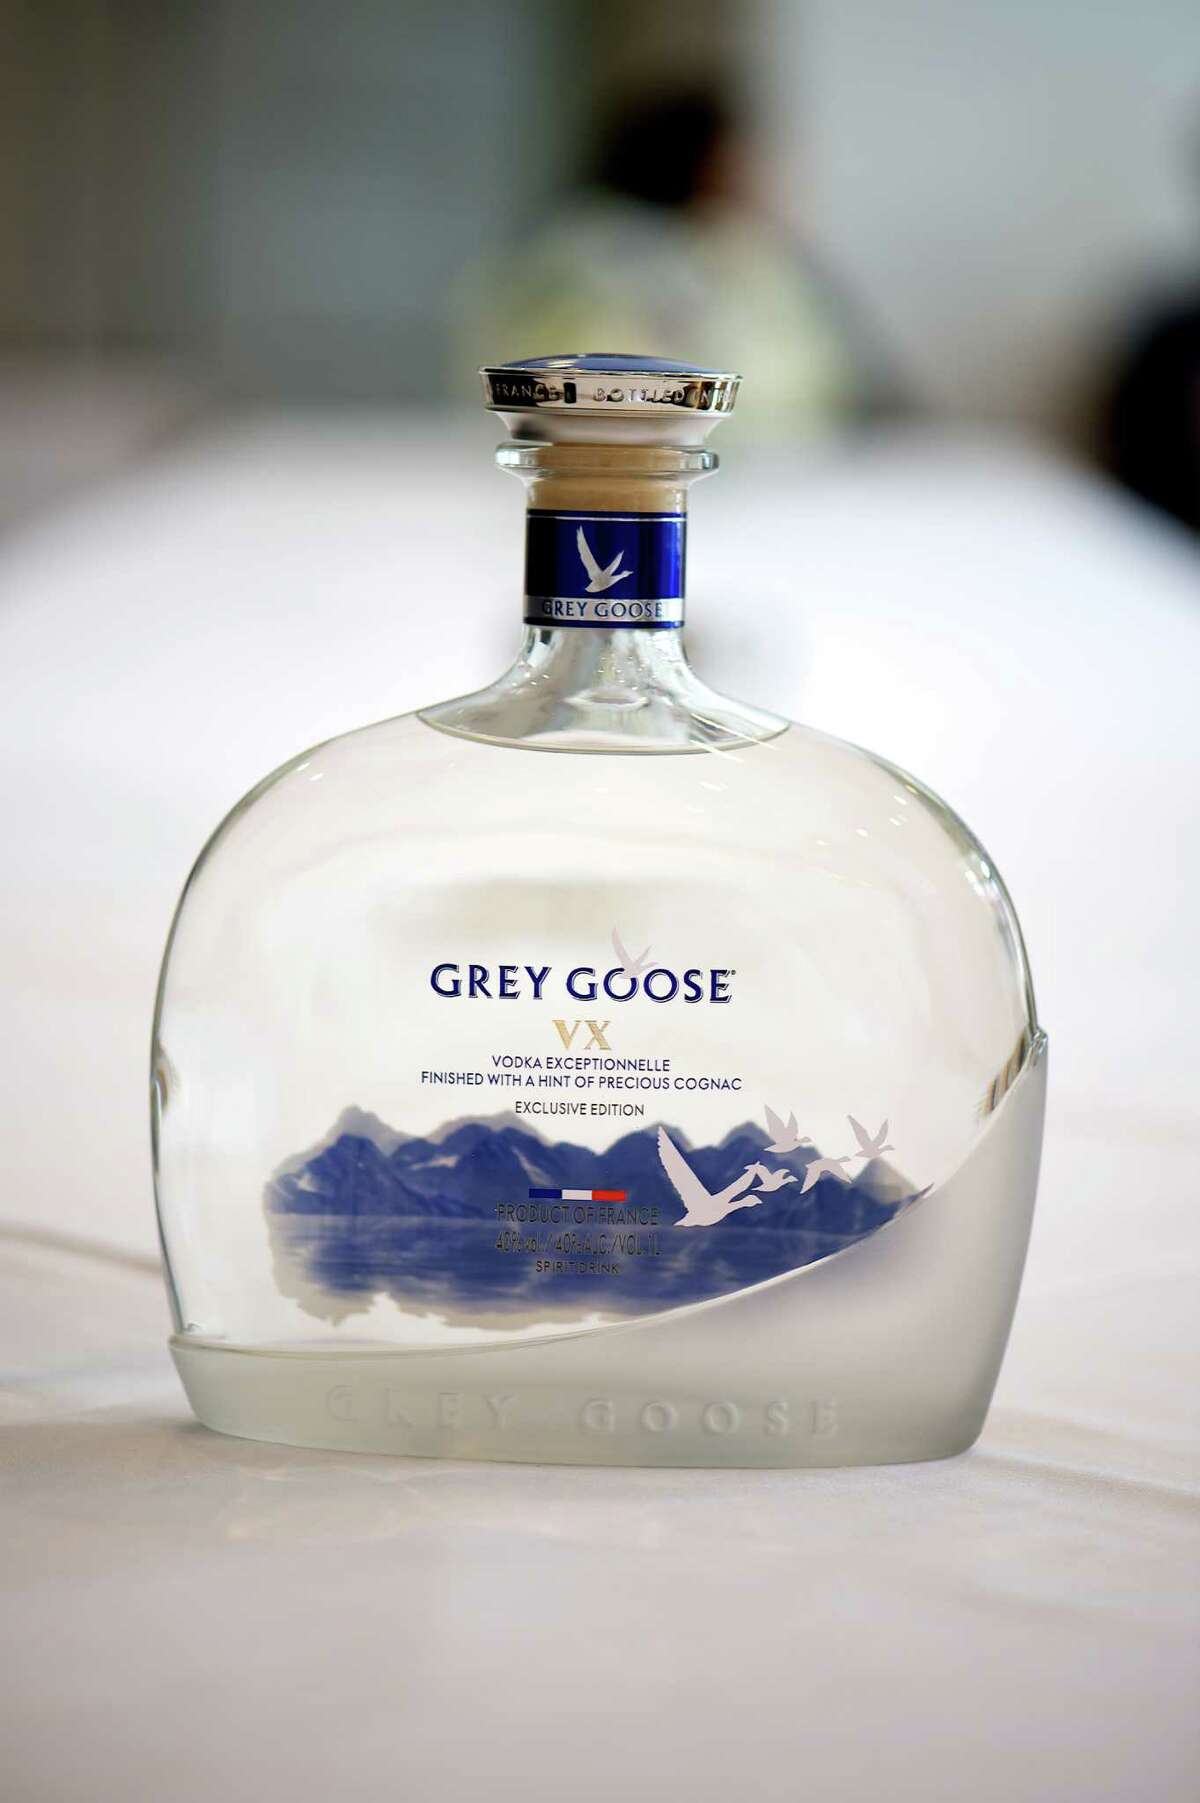 Grey Goose VX is a new vodka blended with cognac.